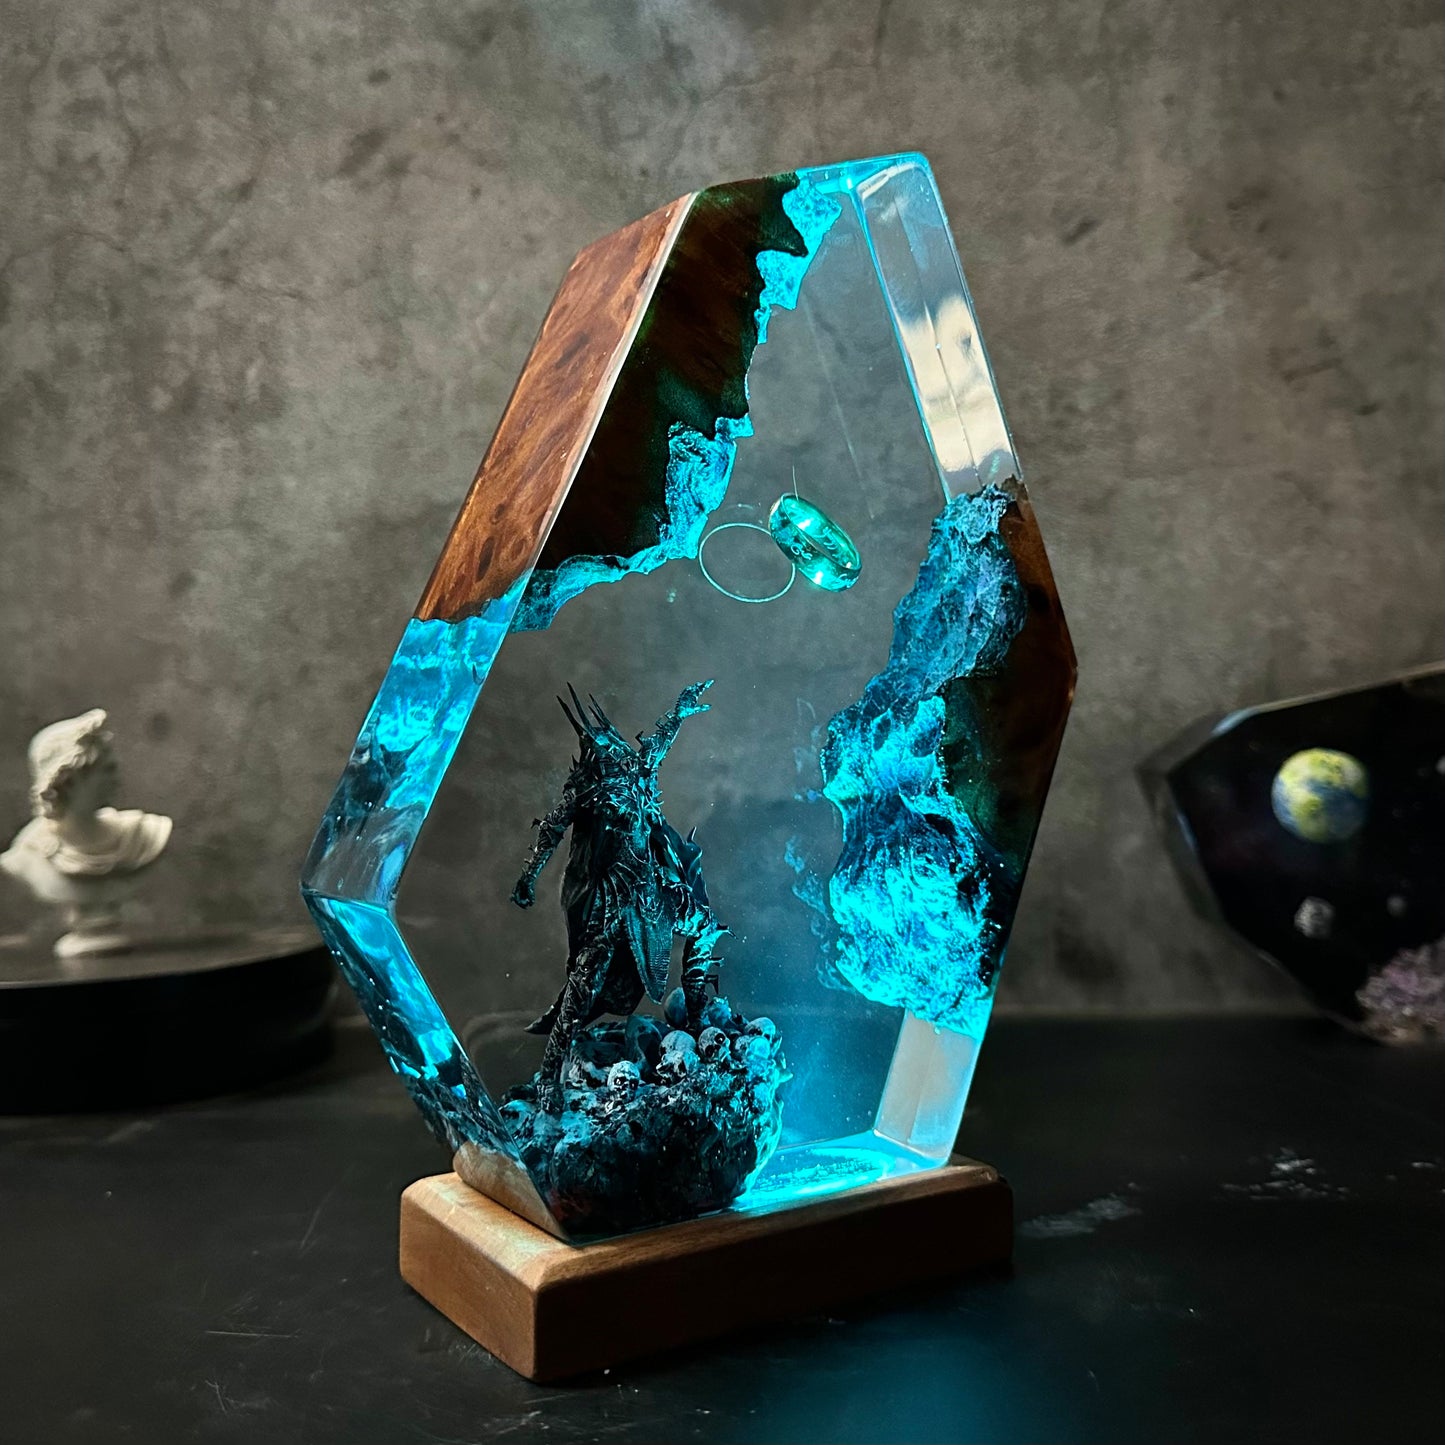 Sauron Lord Of The Rings Resin Lamp